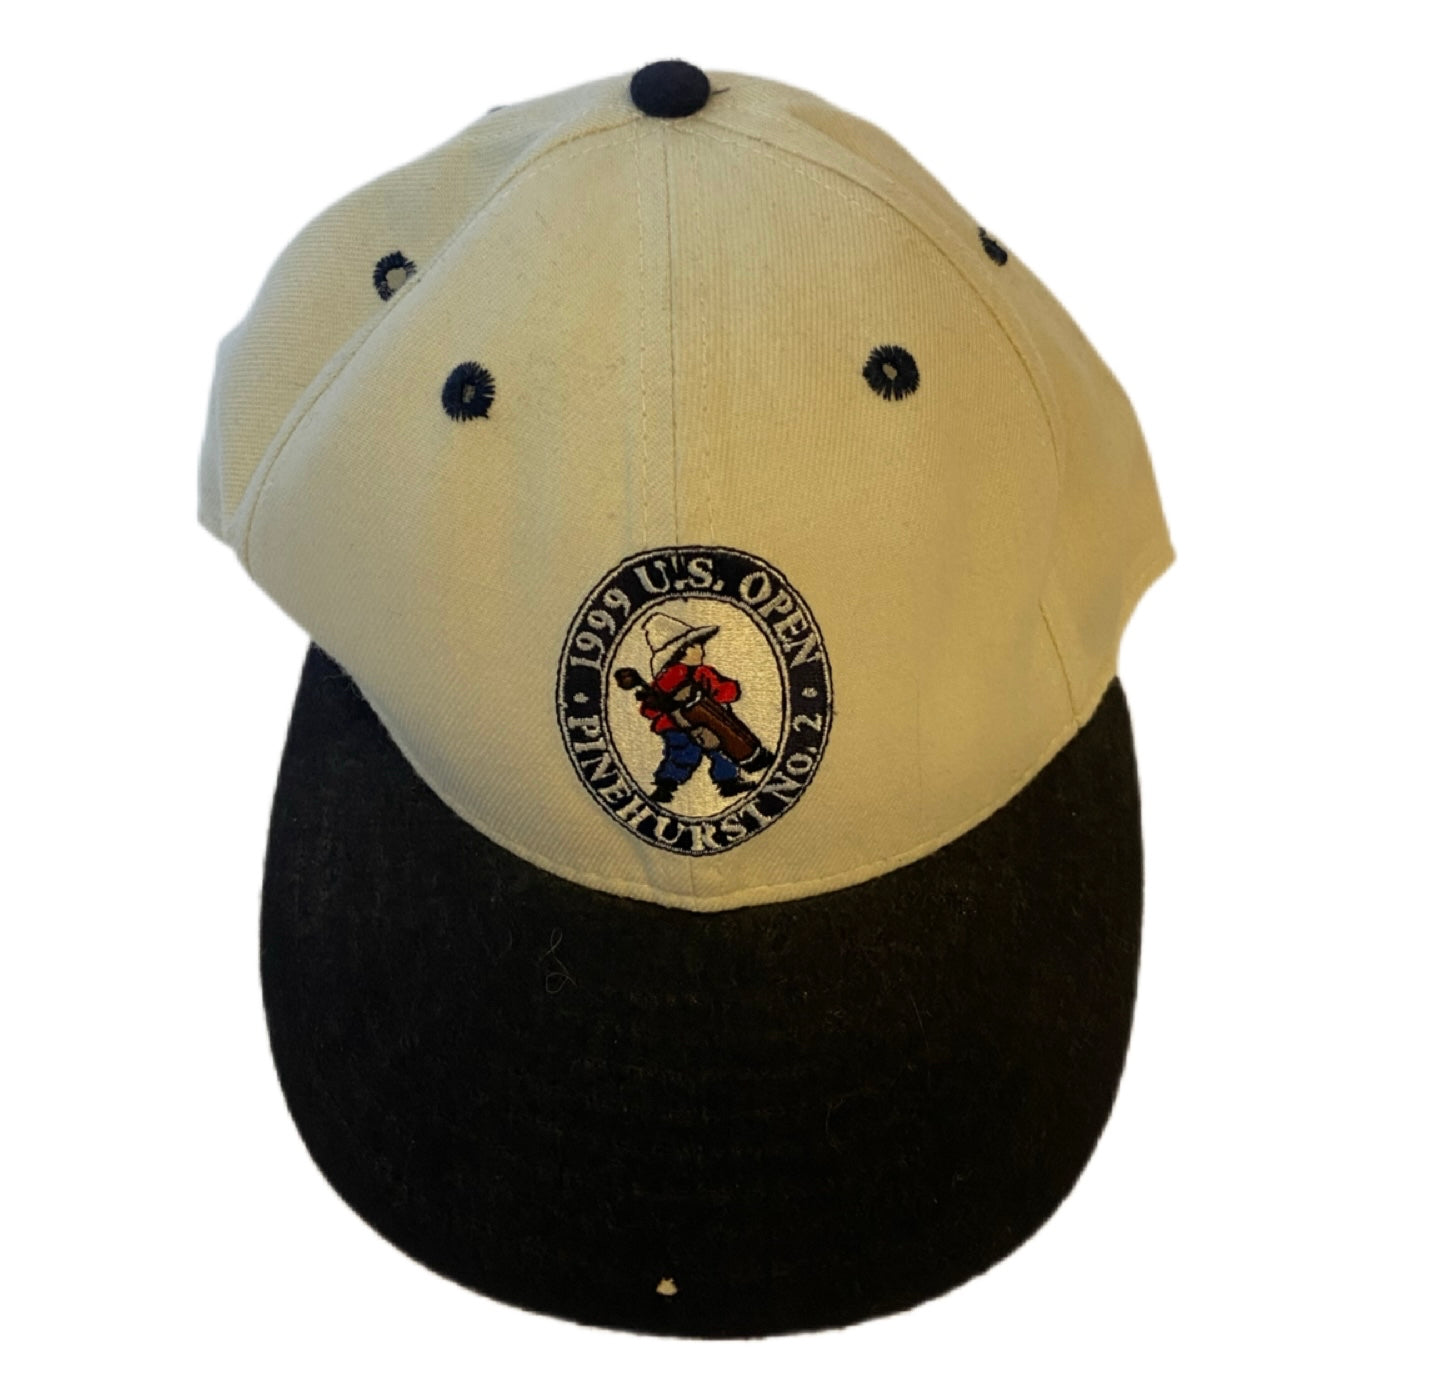 1999 US Open(Pinehurst No. 2) Fitted Hat